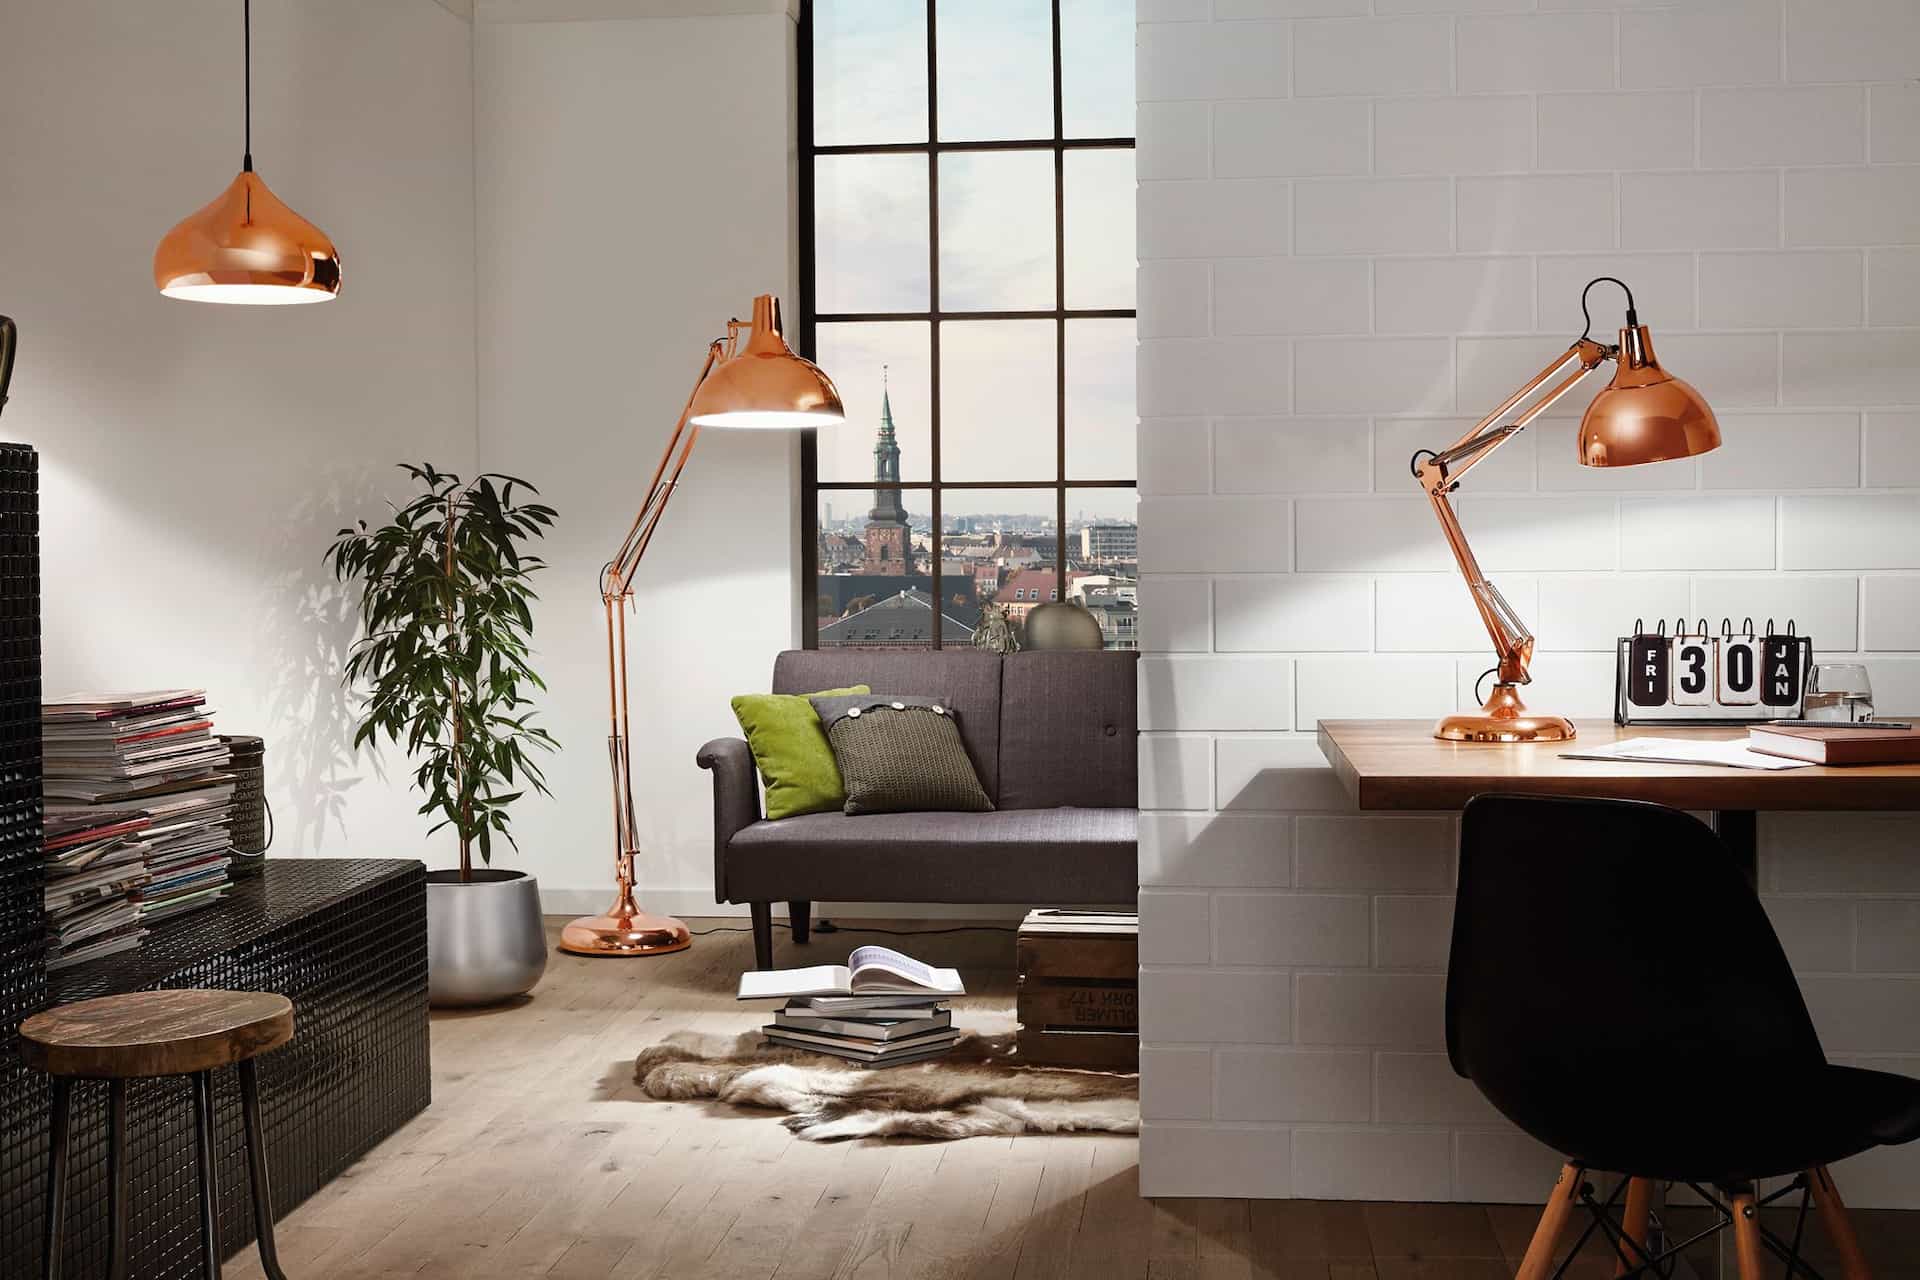 Save up to 90% OFF on Lighting warehouse sale